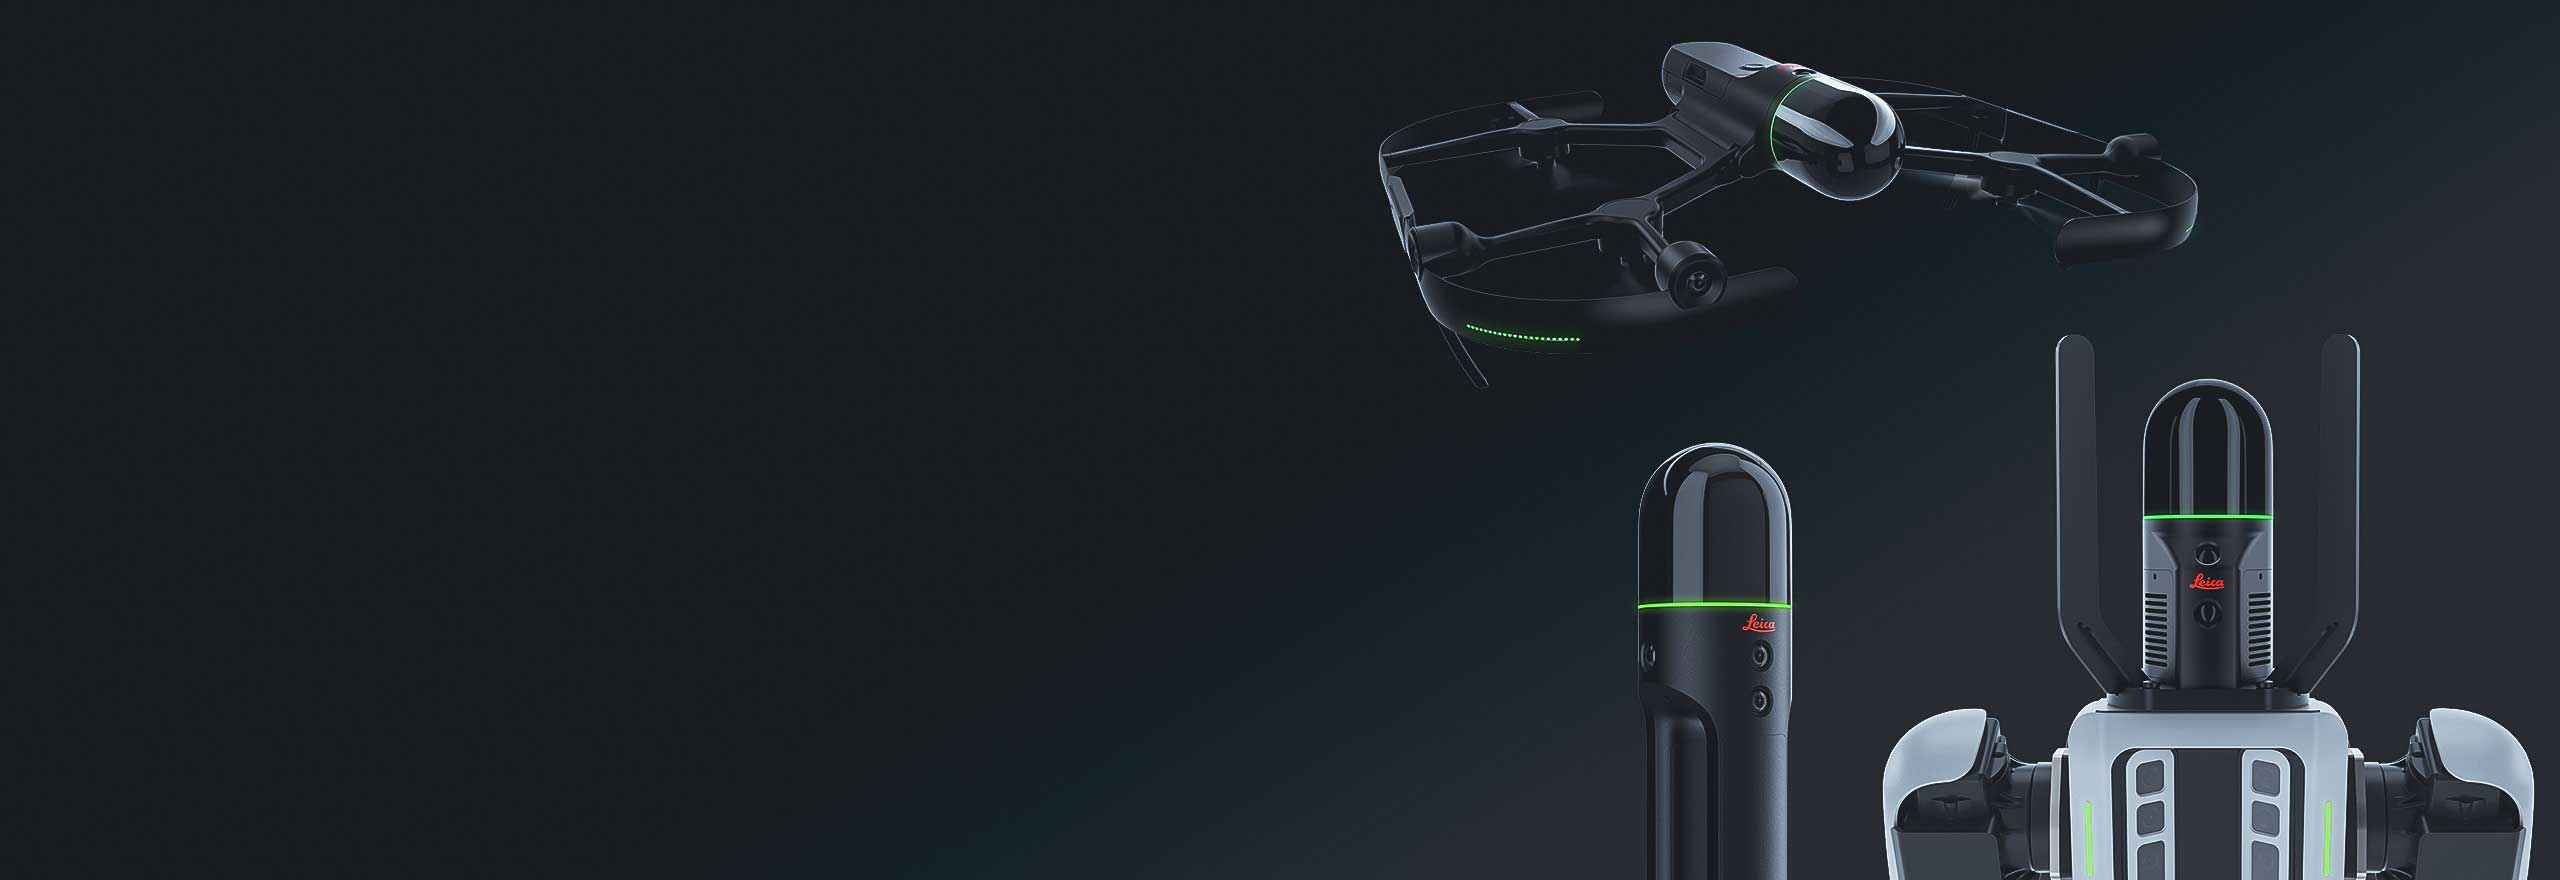 Leica BLK autonomous reality capture solutions from flying laser scanners to robotic carriers